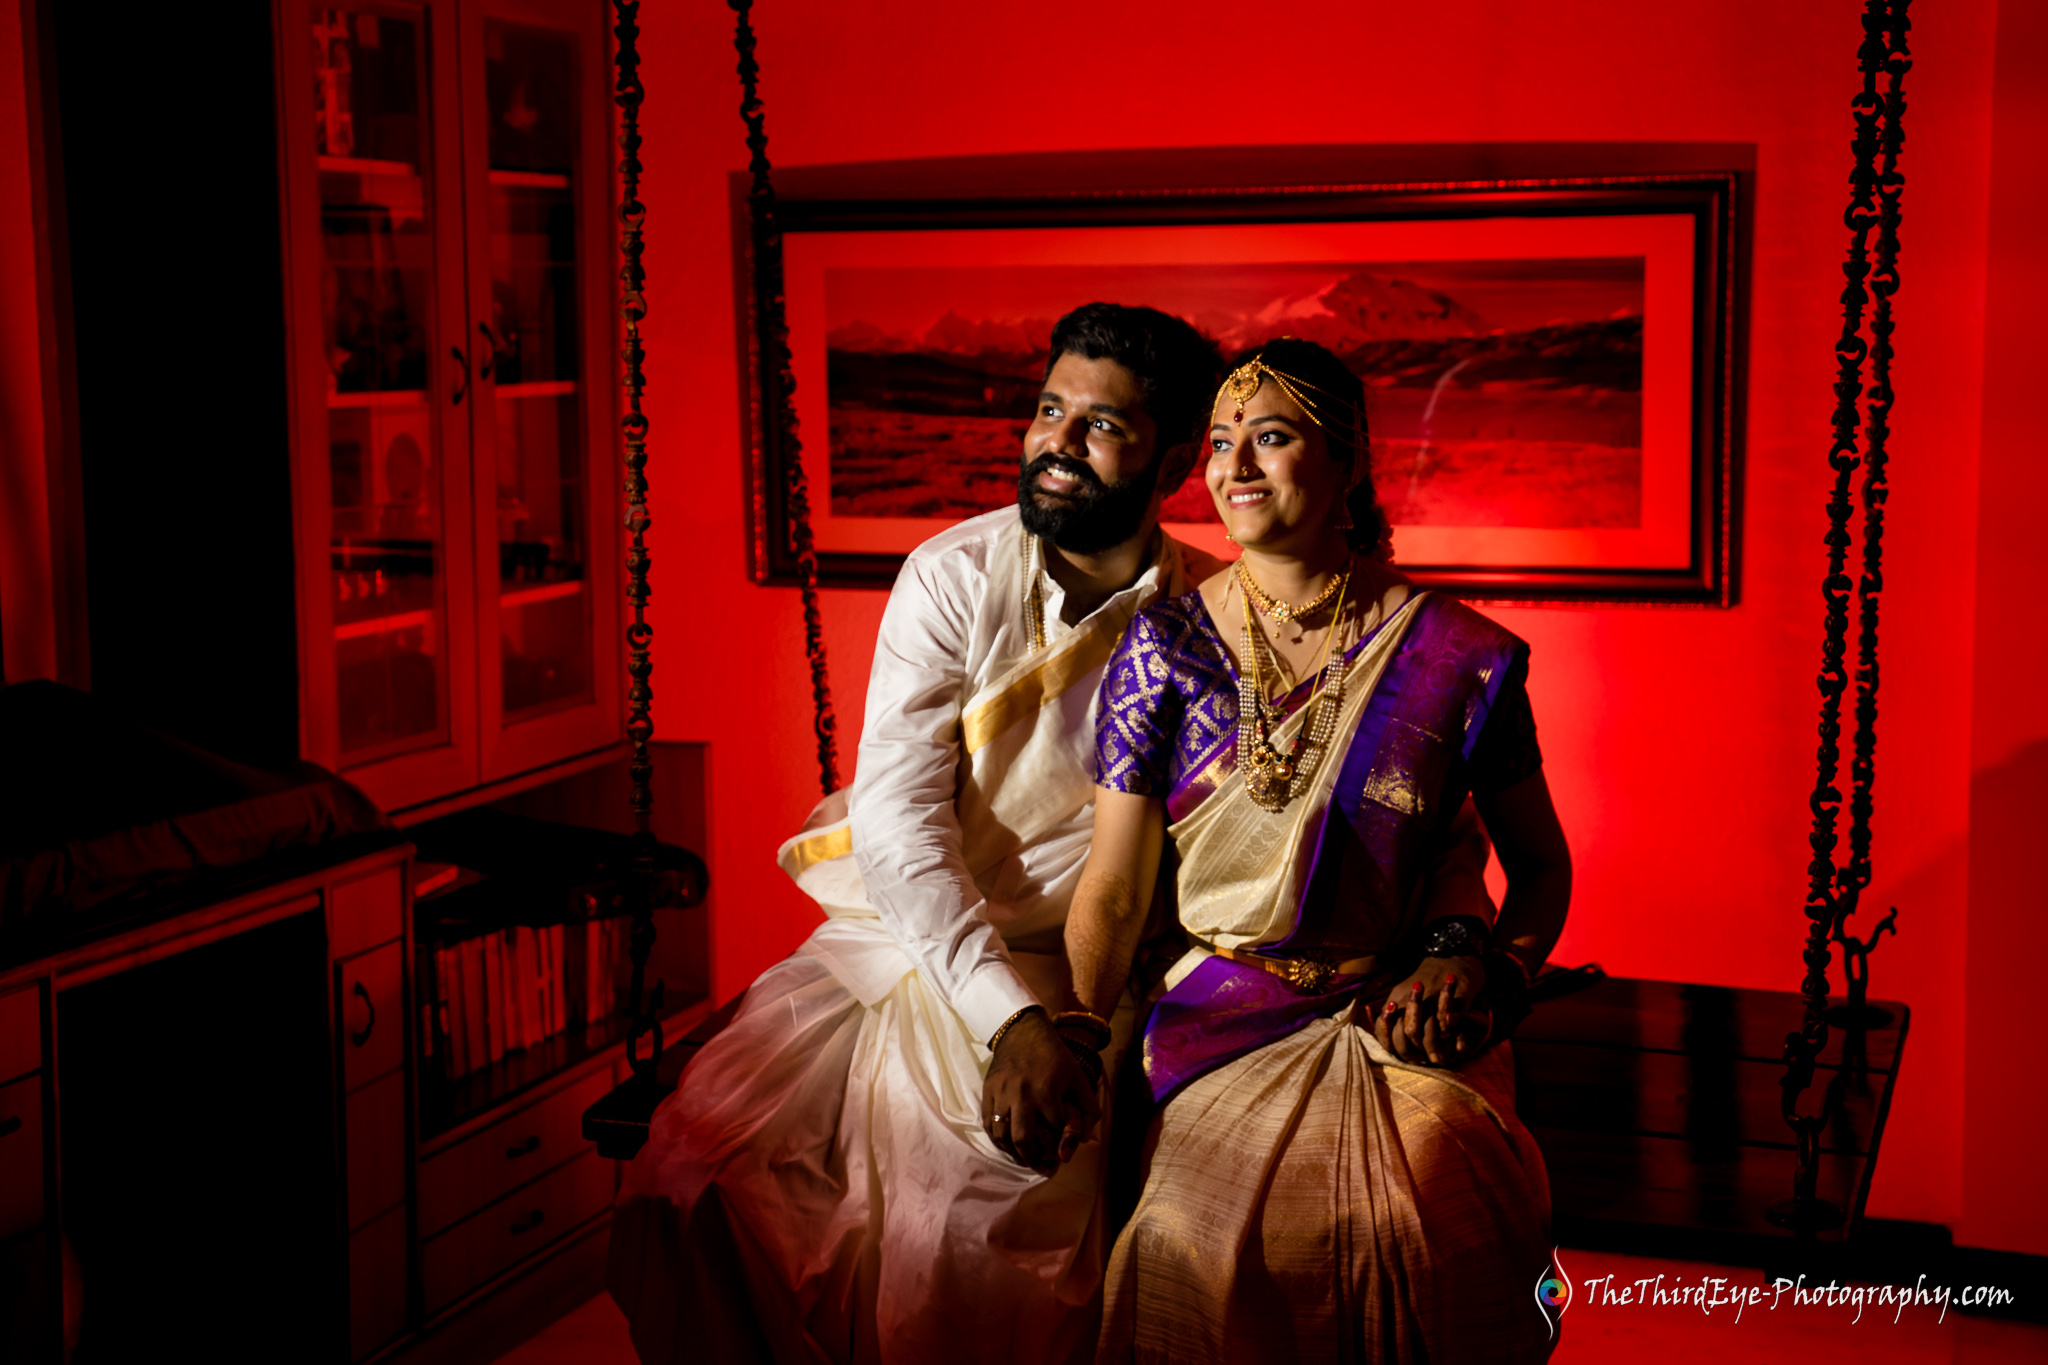 Bride-bridegroom-couple-love-moment-attire-smiles-portrait-prewedding-happy-smile-pose-Best-indian-wedding-red-Marriage-photography-covid19-recommendations-magmod-TTEP_CM_40_A7009645